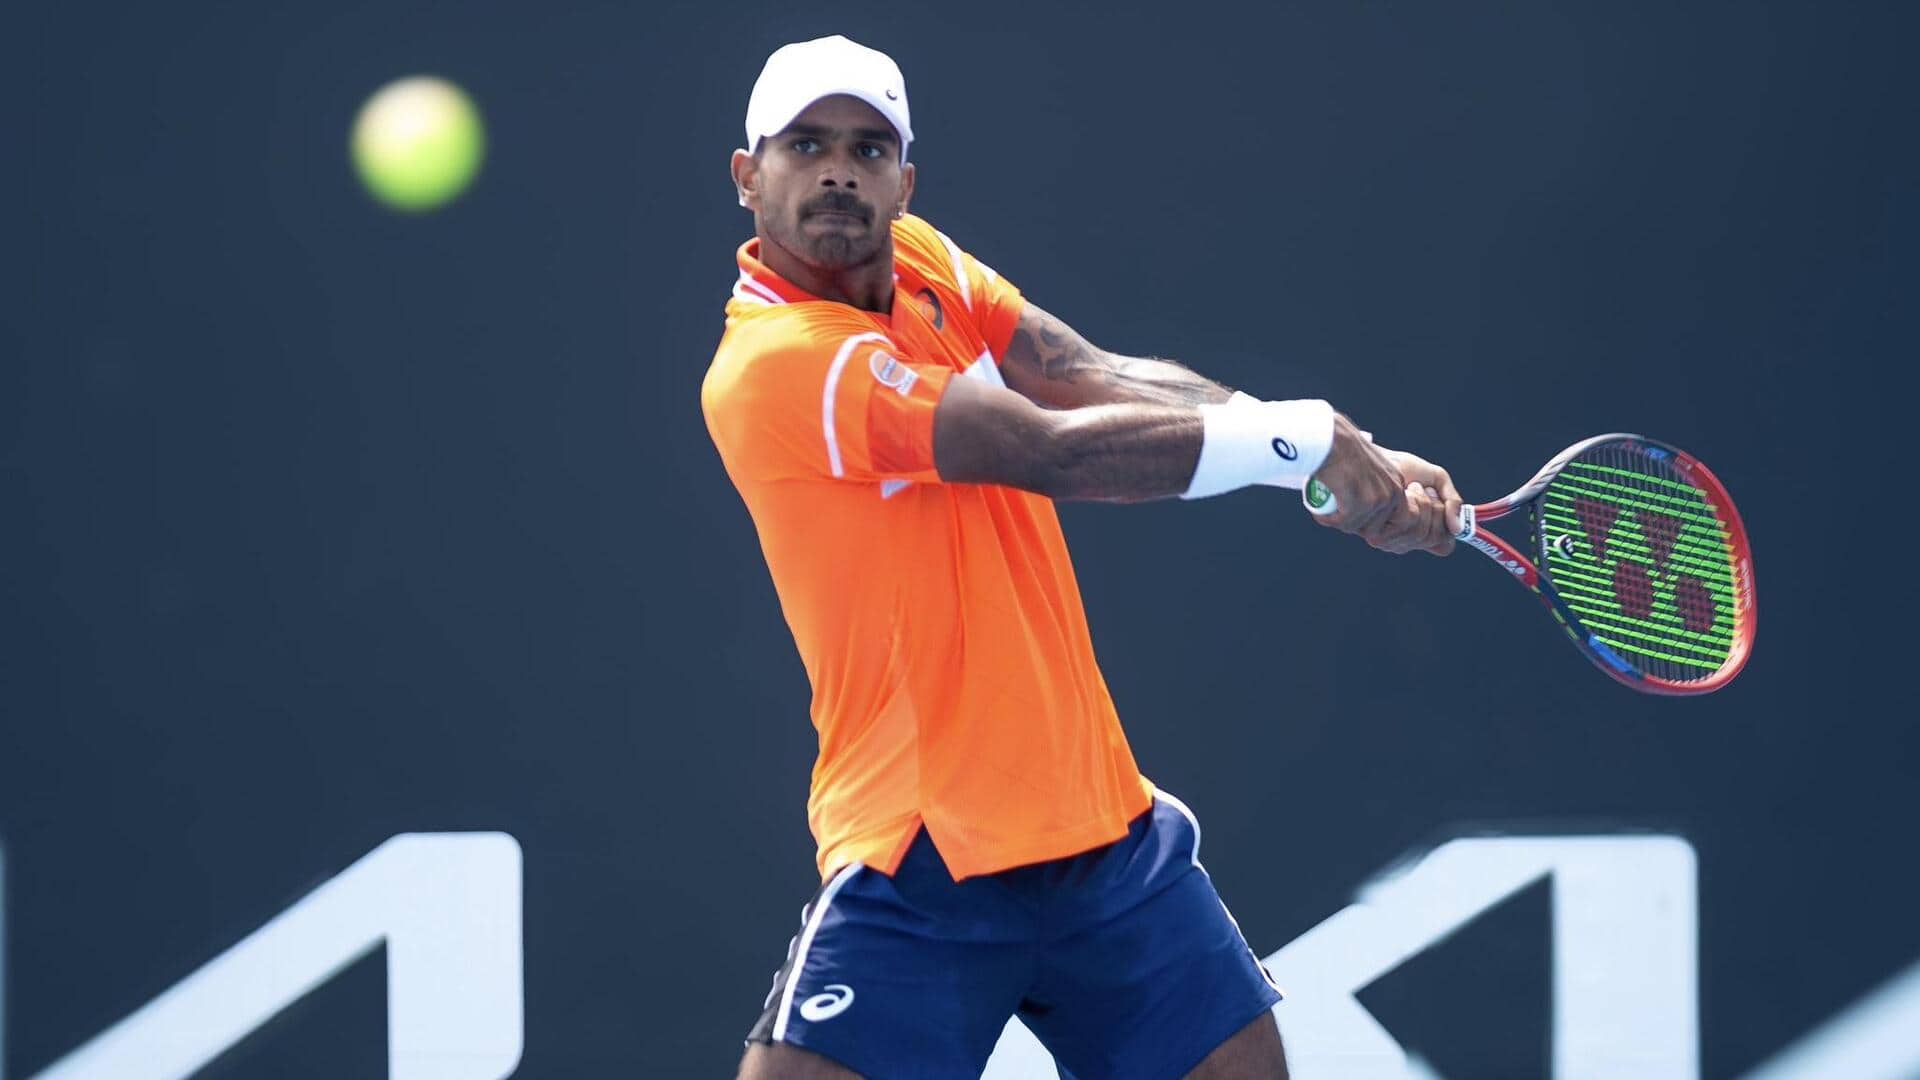 Sumit Nagal qualifies for his fourth Grand Slam main draw